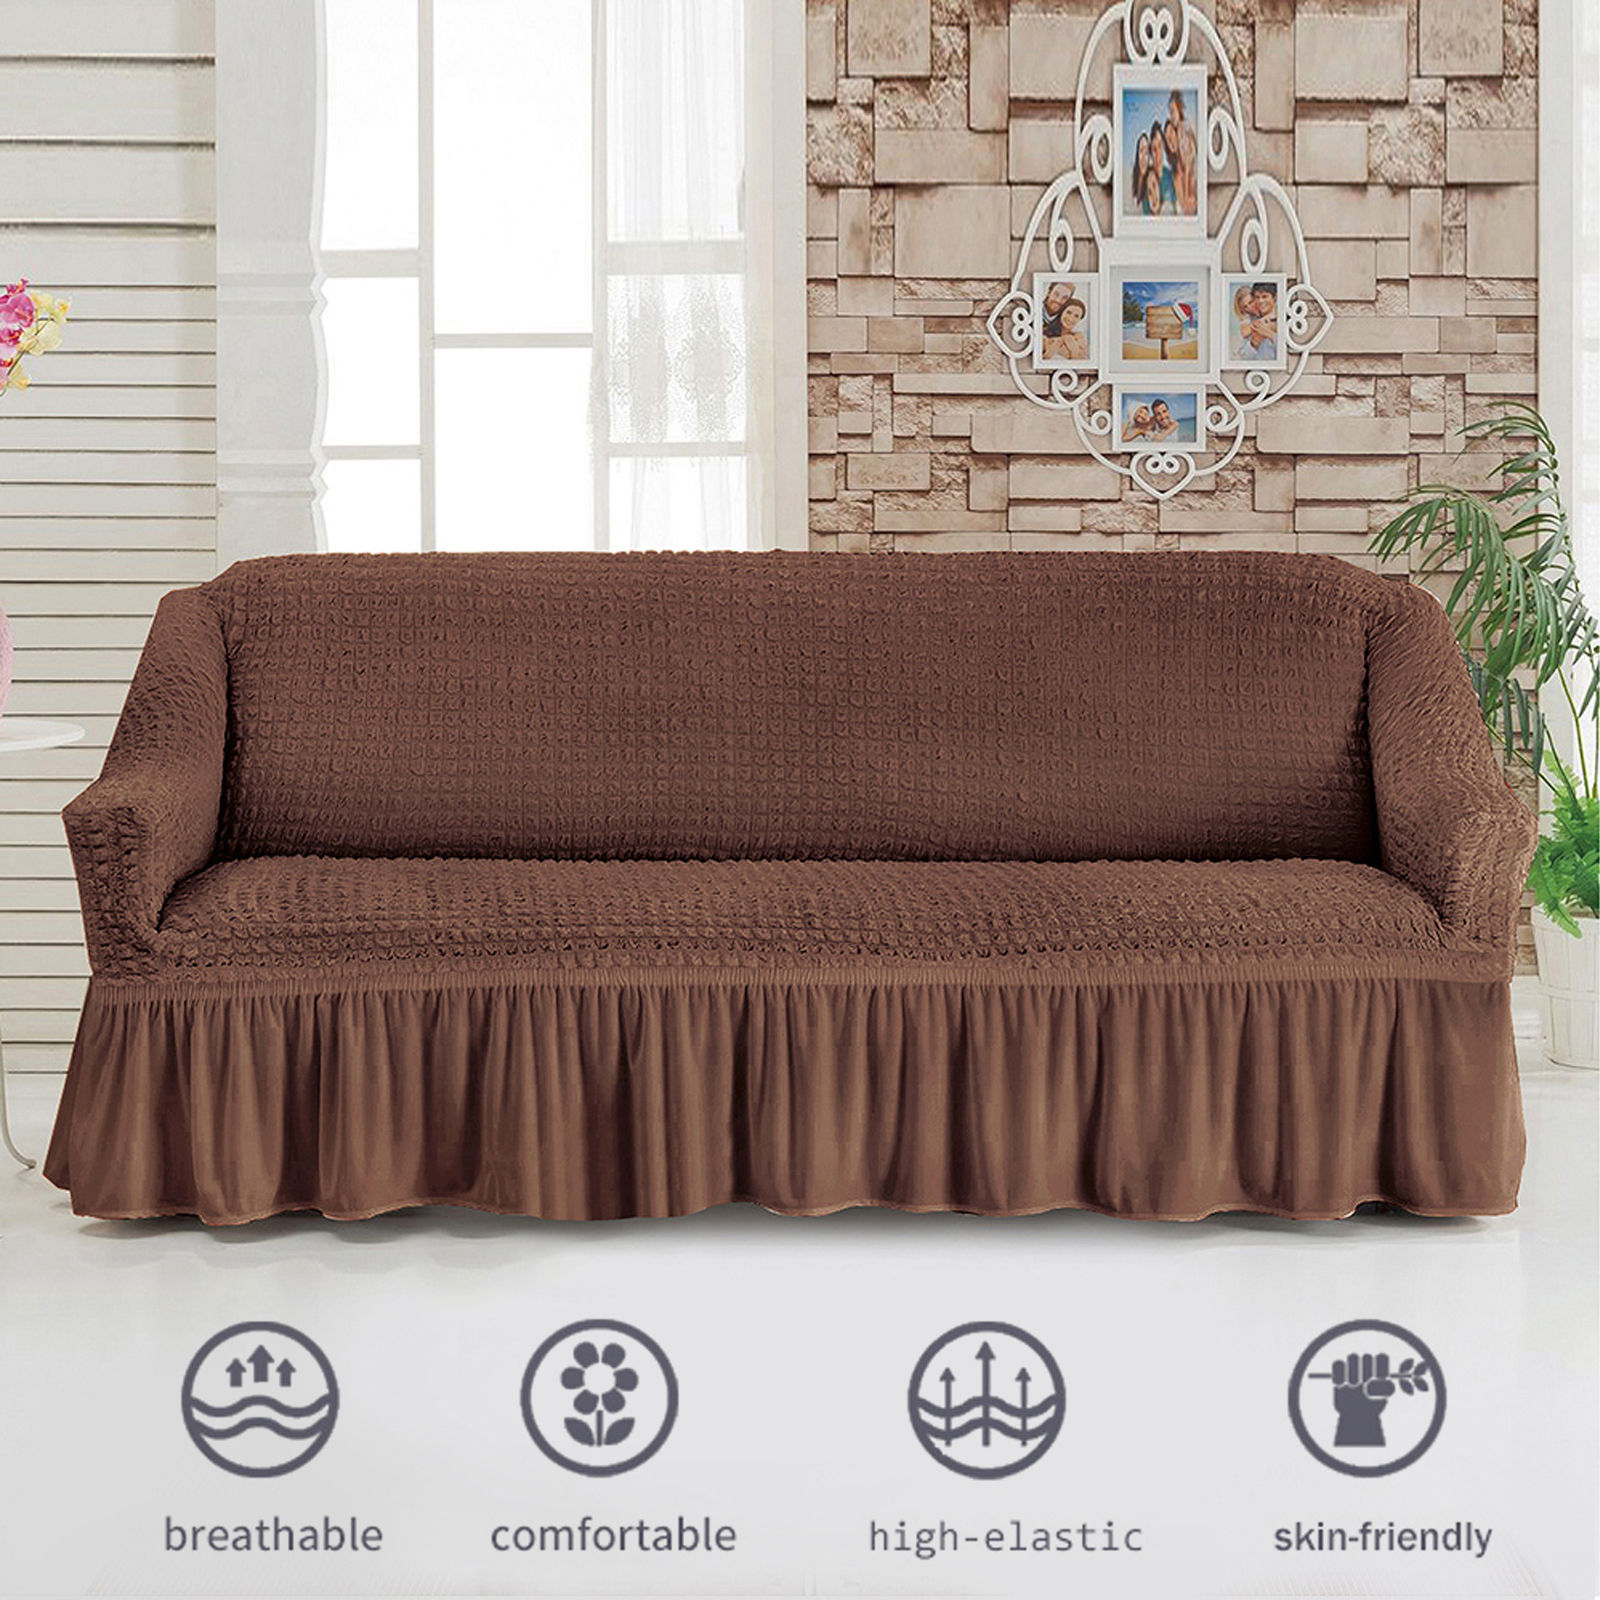 Stretch Sofa Slipcover, 3 Seater Sofa Slipcovers With Skirt With Armless Soft Sofa Cover Elastic Straps Sofa Slipcover For Living Room Kids Pets-Brown B-Large